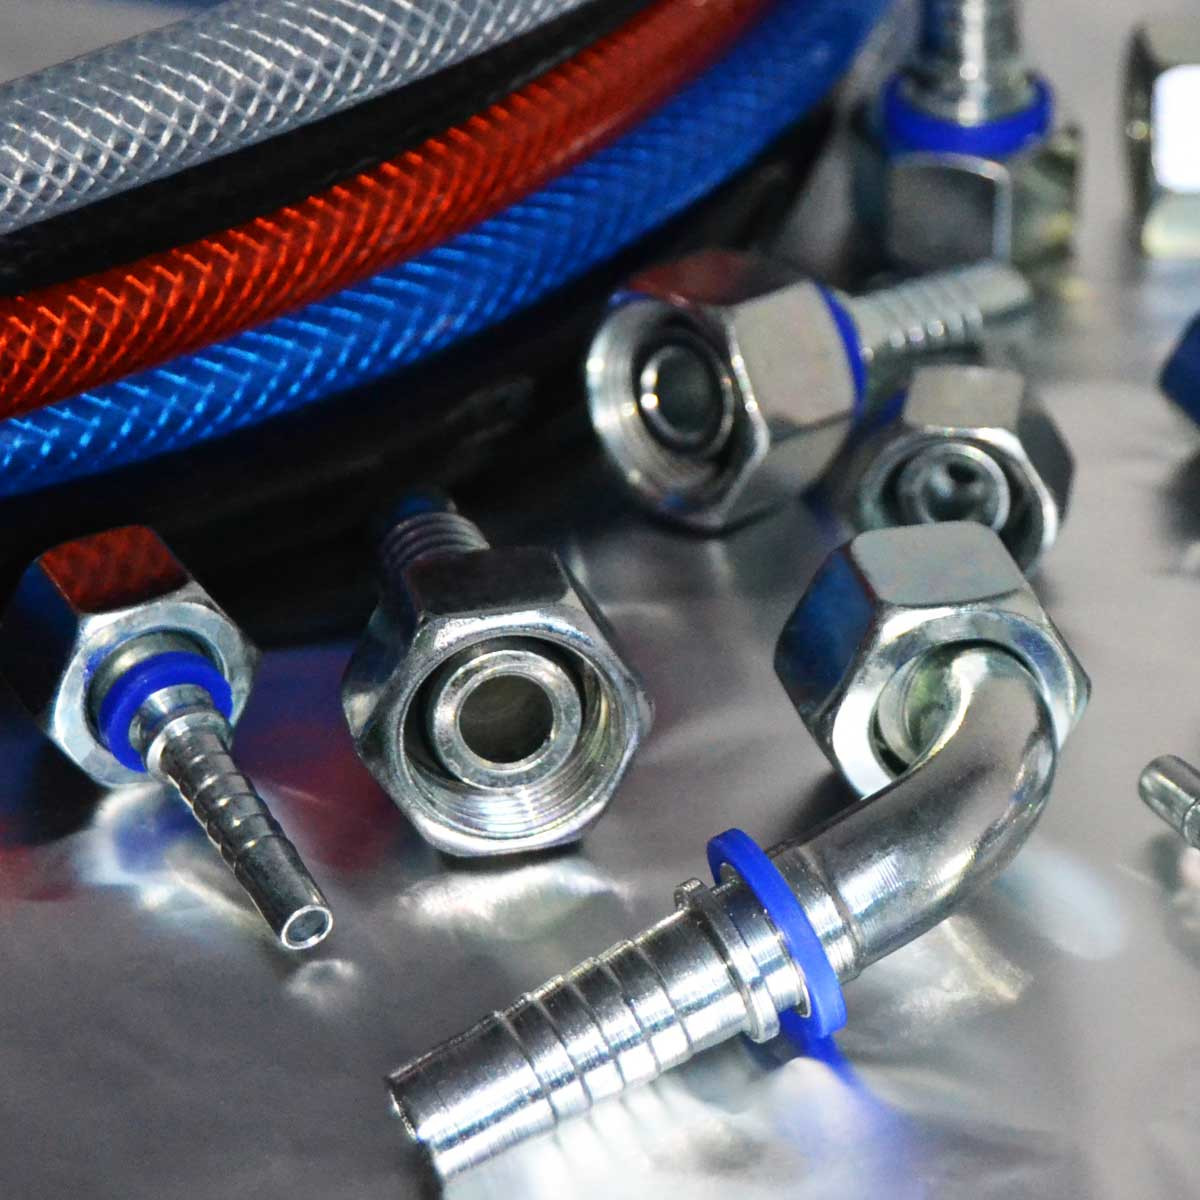 High-quality hose technology and hydraulic fittings for...